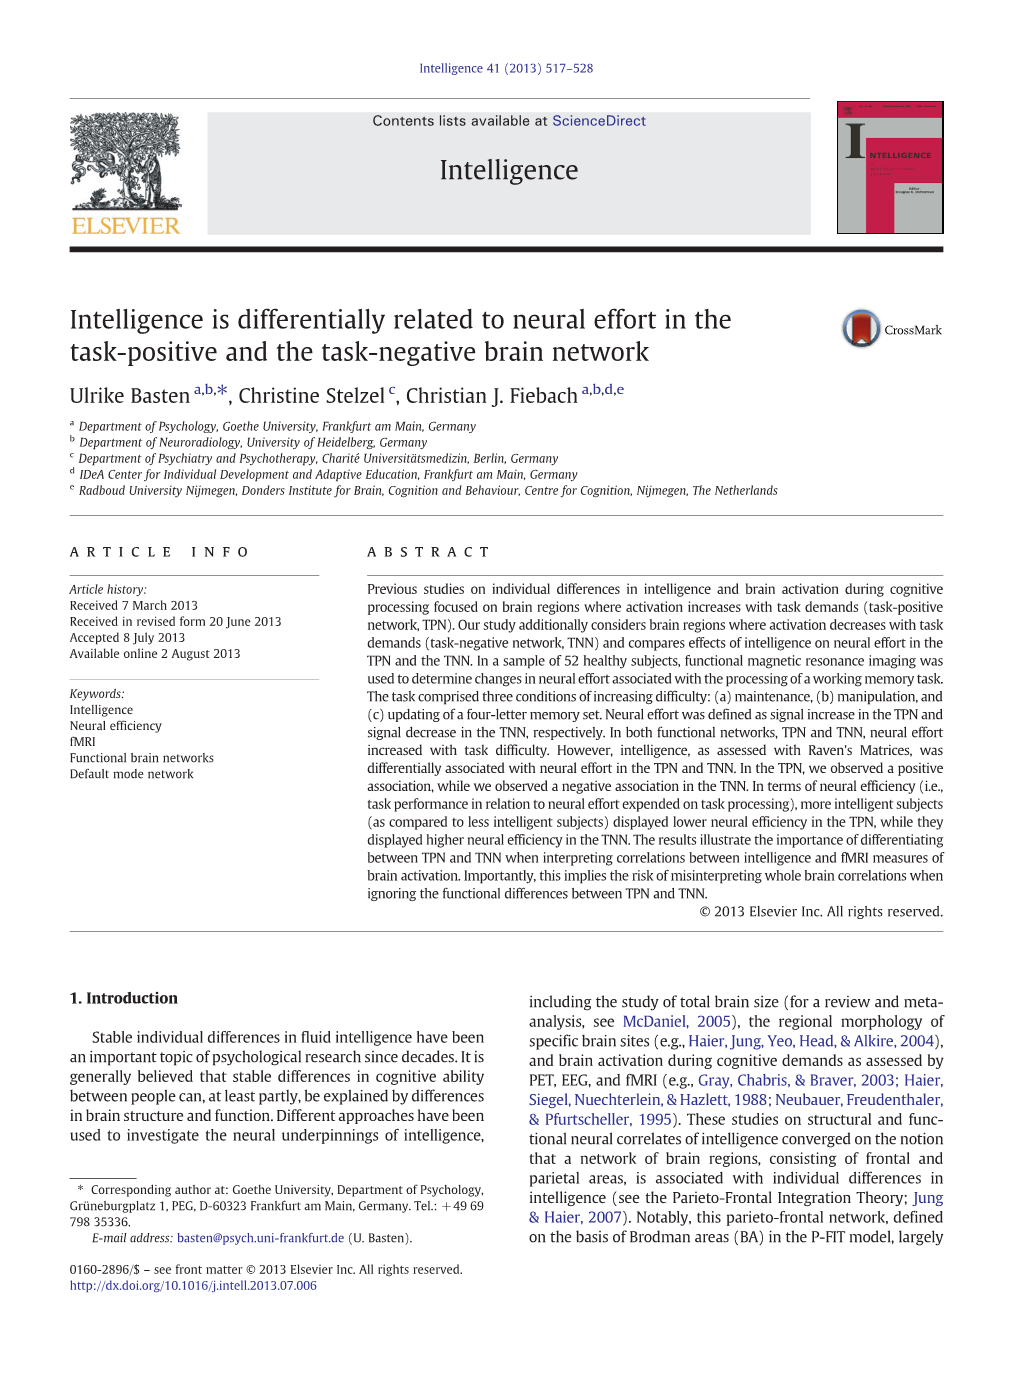 Intelligence Is Differentially Related to Neural Effort in the Task-Positive and the Task-Negative Brain Network